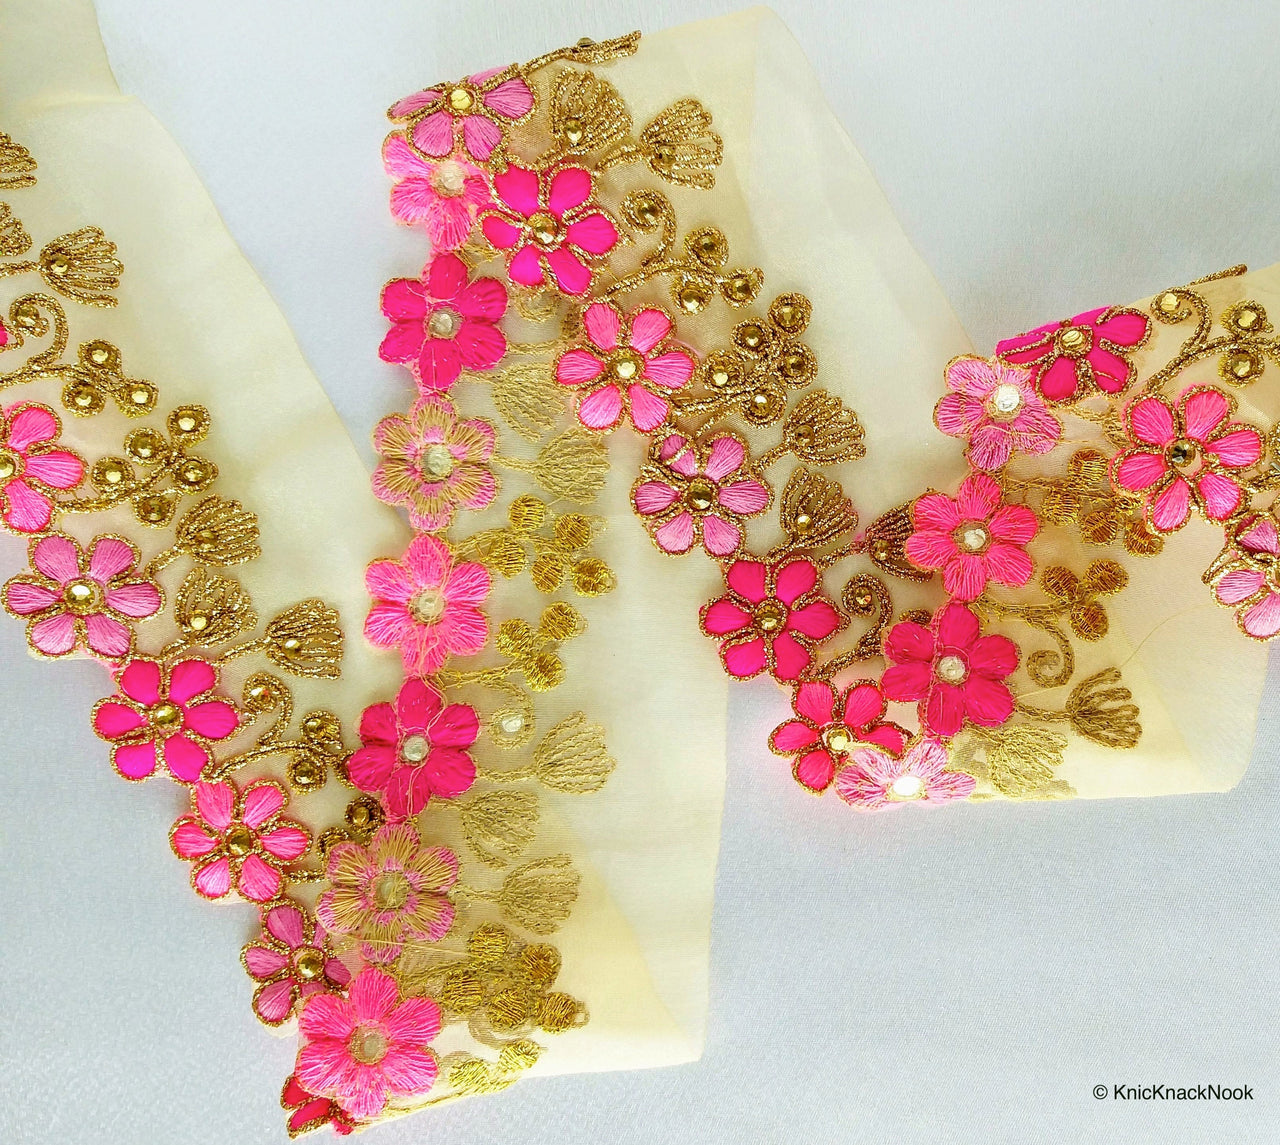 Gold Sheer Tissue Fabric Trim With Embroidered Pink & Gold Flowers, Embellished With Beads, Approx. 65 mm Wide - 210119L102